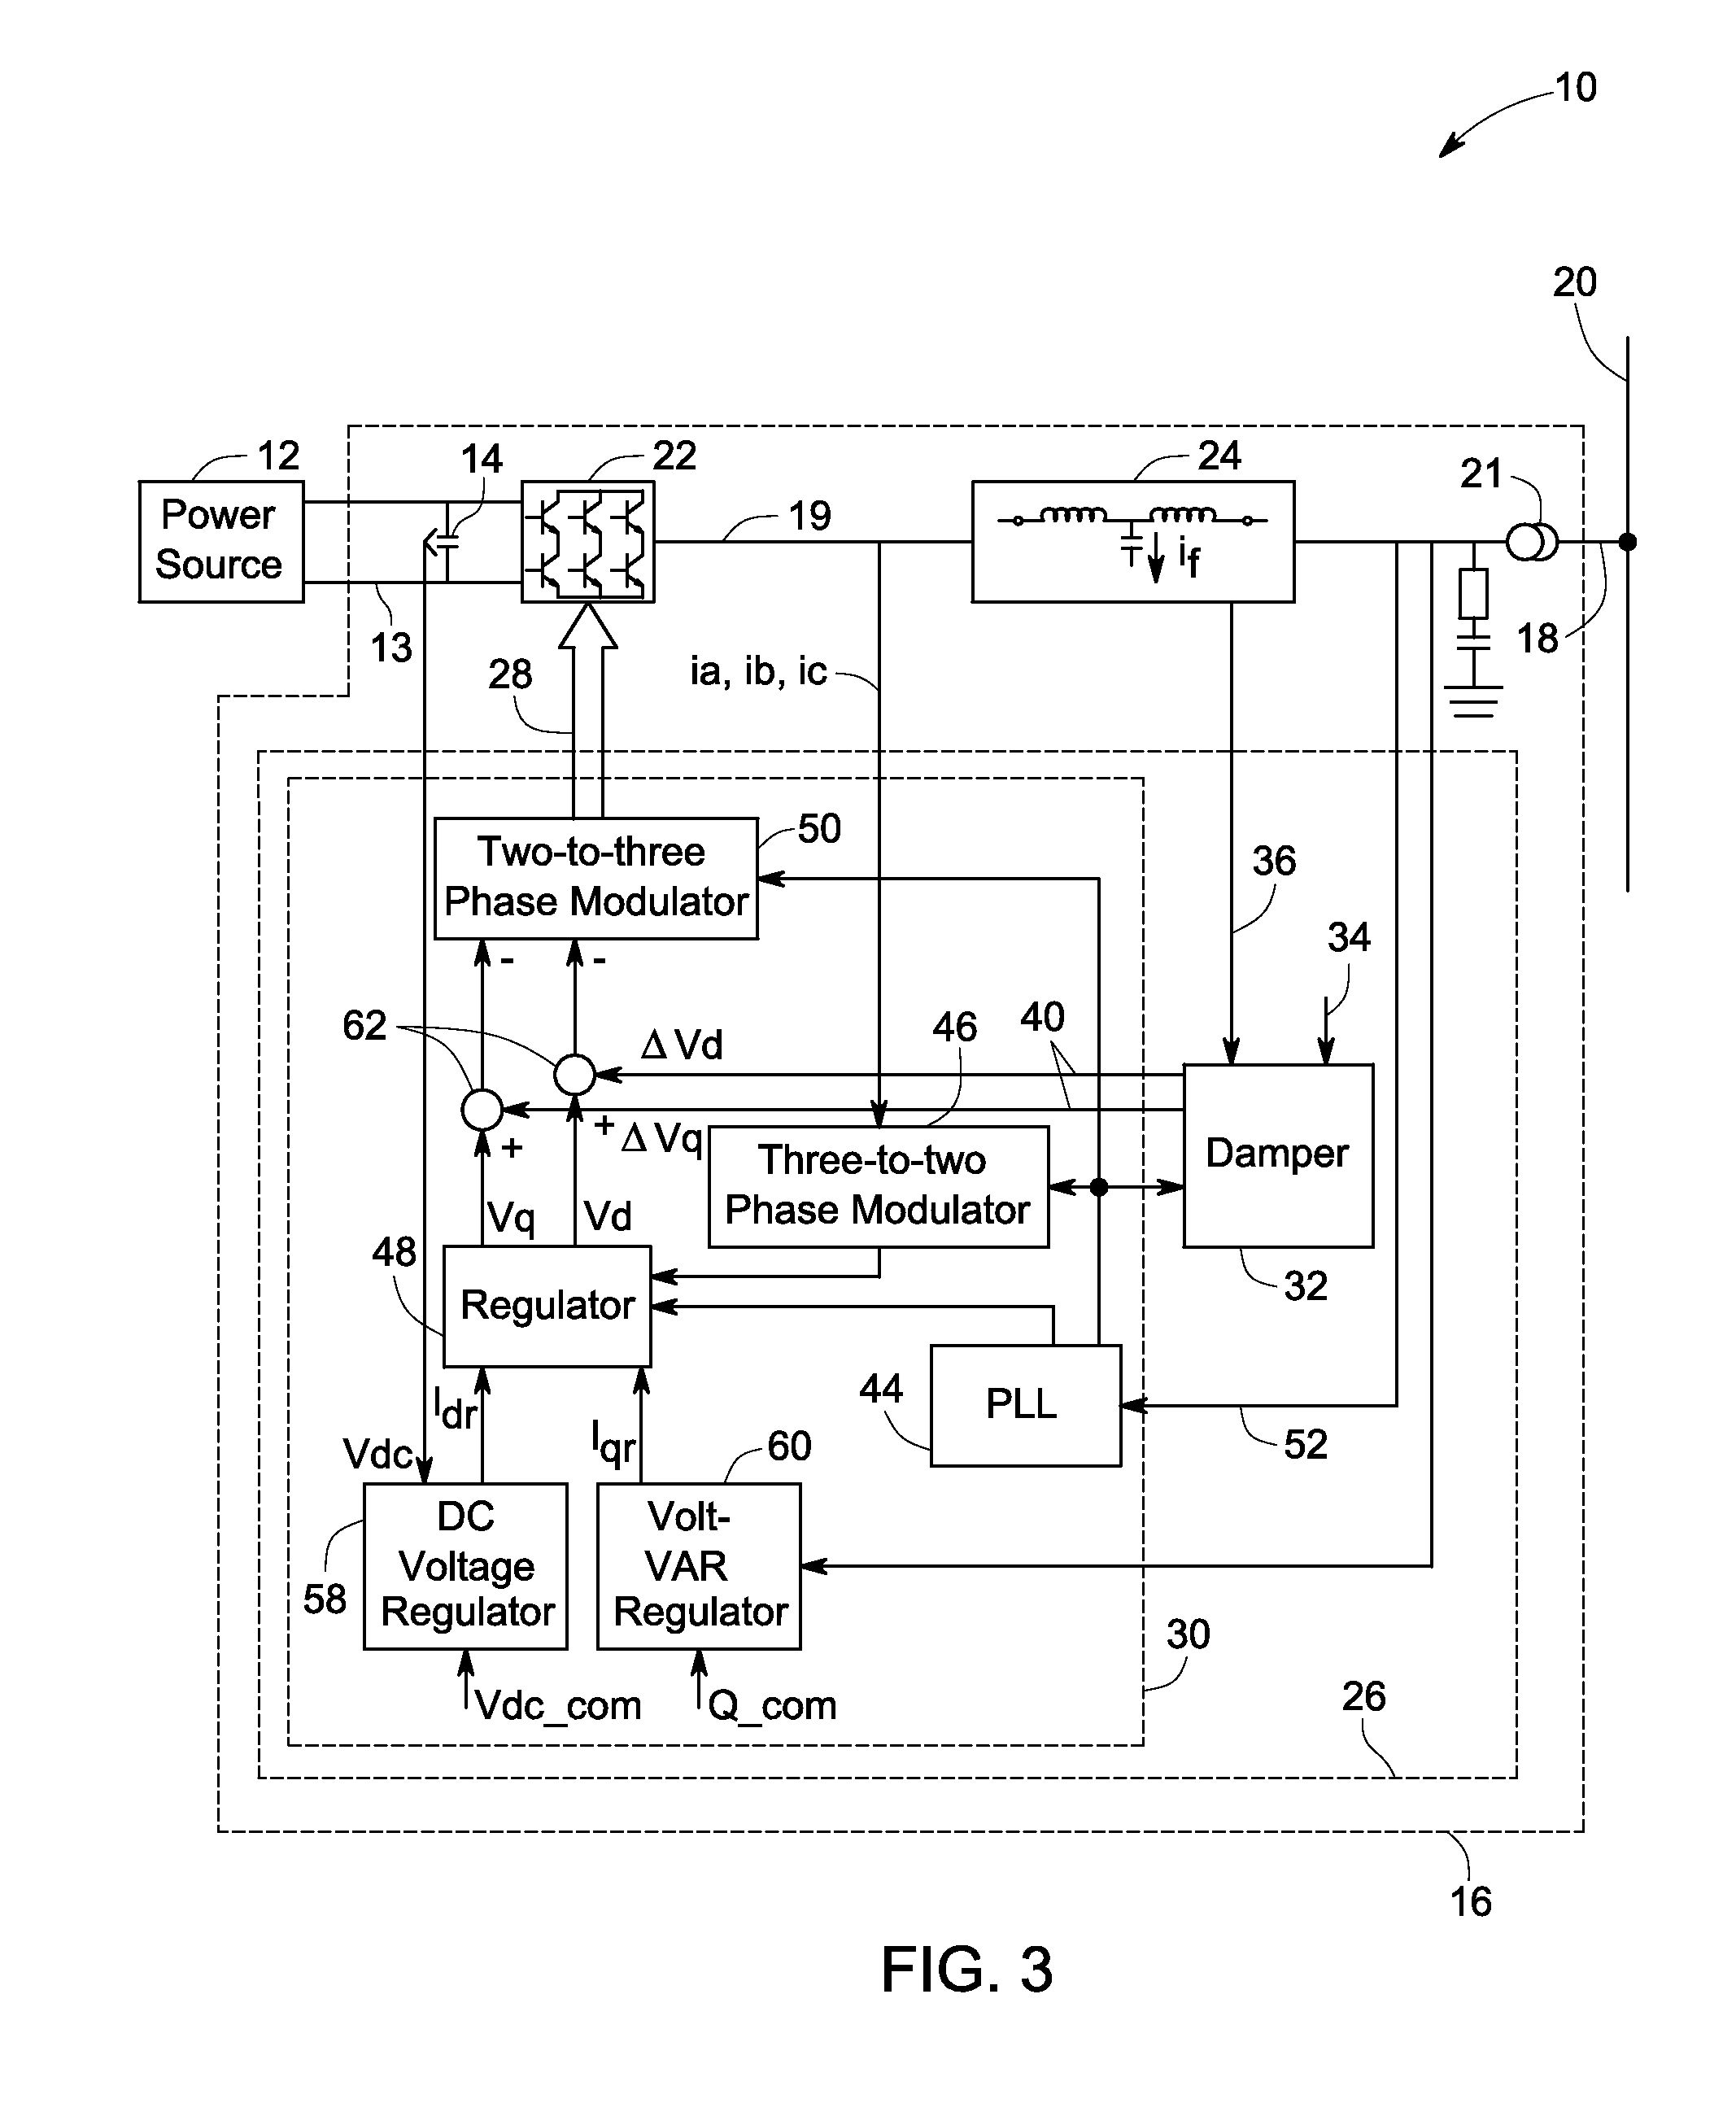 System and method for damping lc circuits in power conversion systems